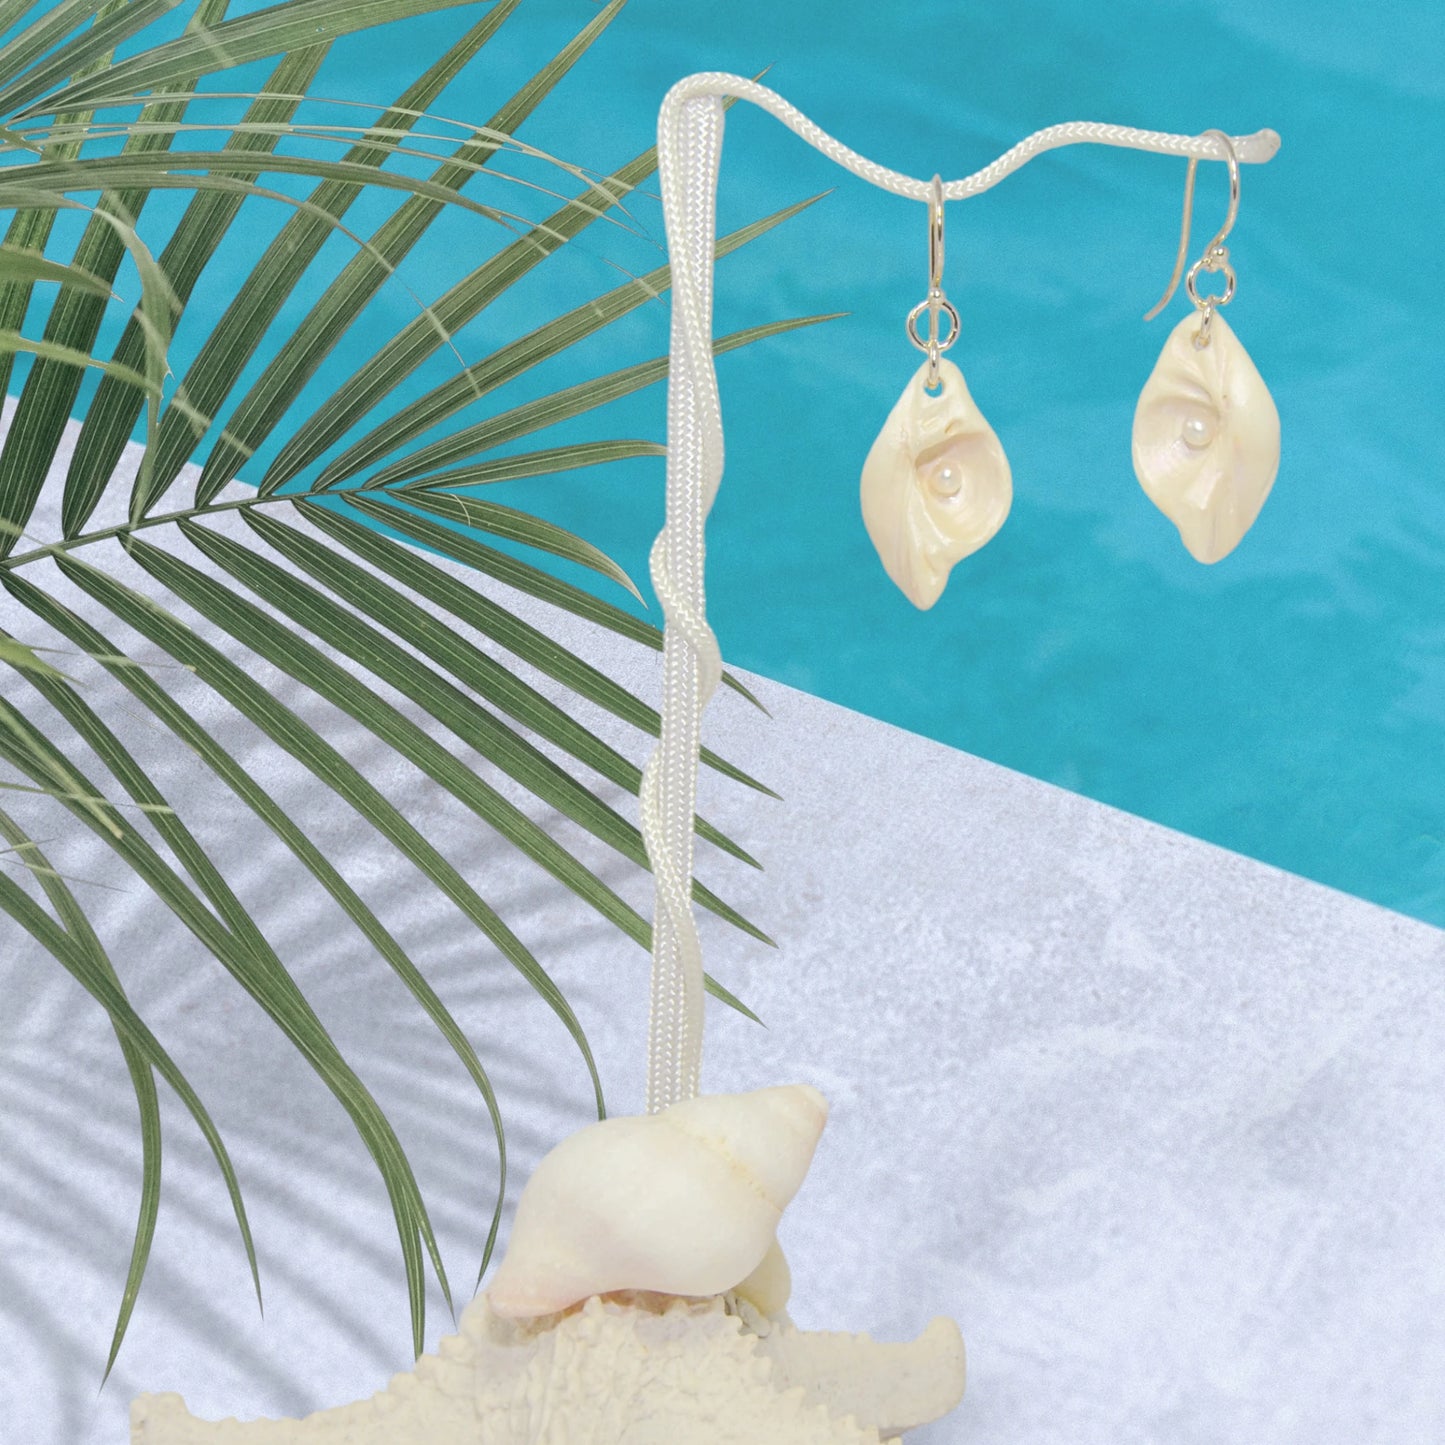 Serenity natural seashell earrings with real baby freshwater pearls. The earrings are hanging on a stand by the pool.